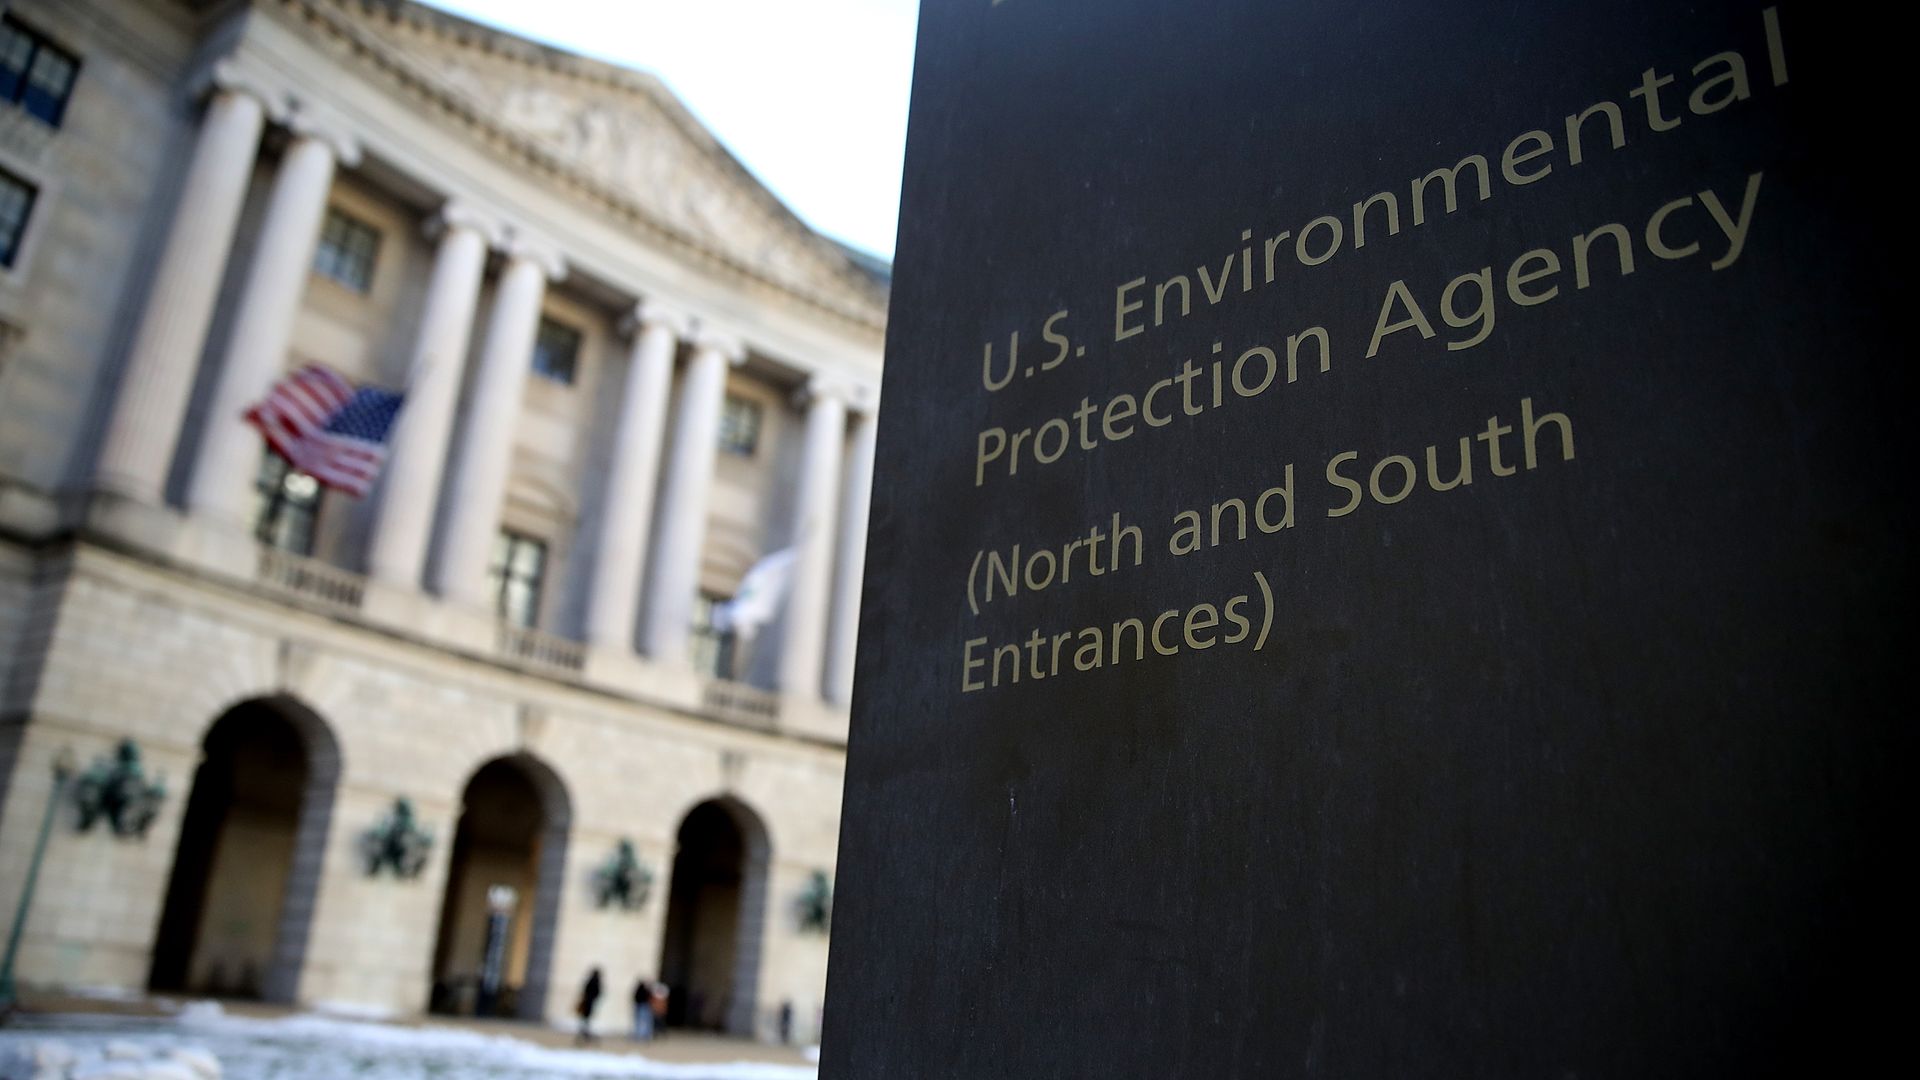 A view of the U.S. Environmental Protection Agency (EPA) headquarters on March 16, 2017 in Washington, DC.